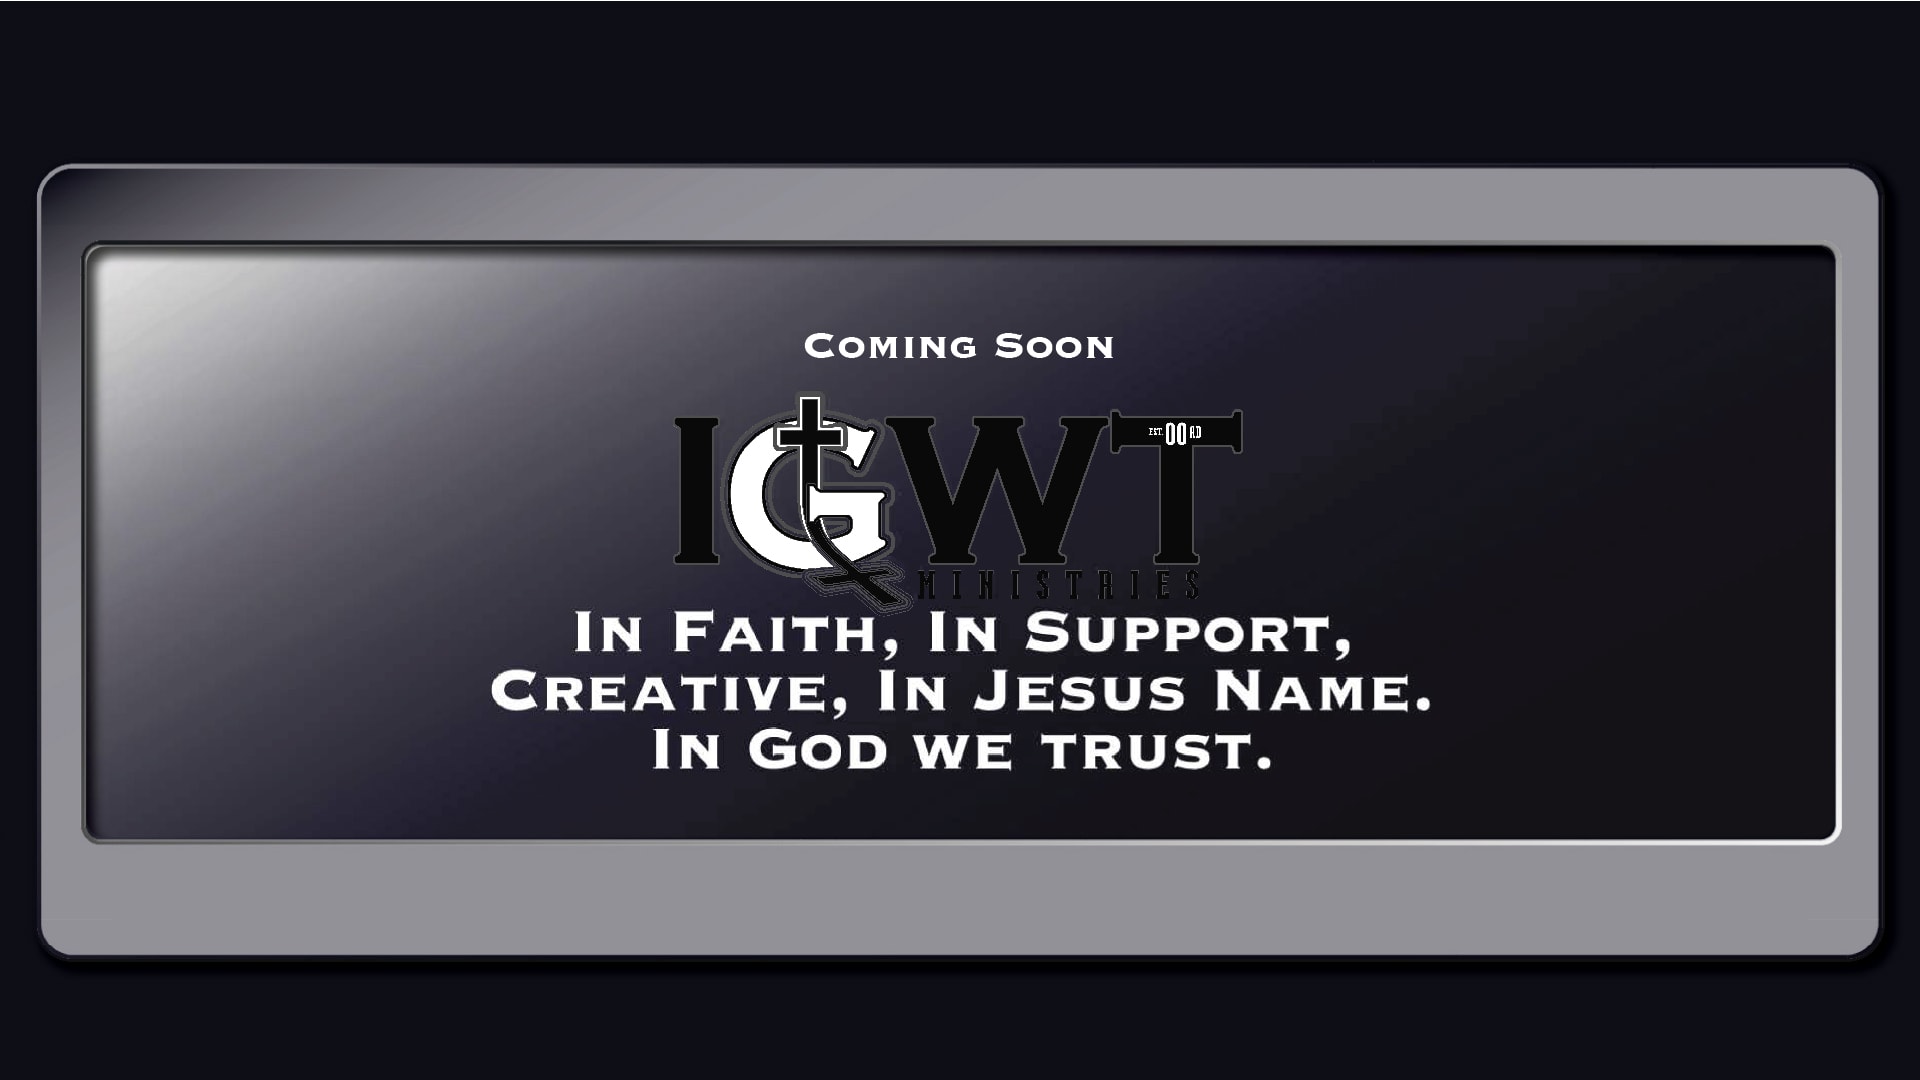 Coming Soon: IGWT Ministries. In Faith, In Support, Creative, In Jesus Name. In God We Trust.